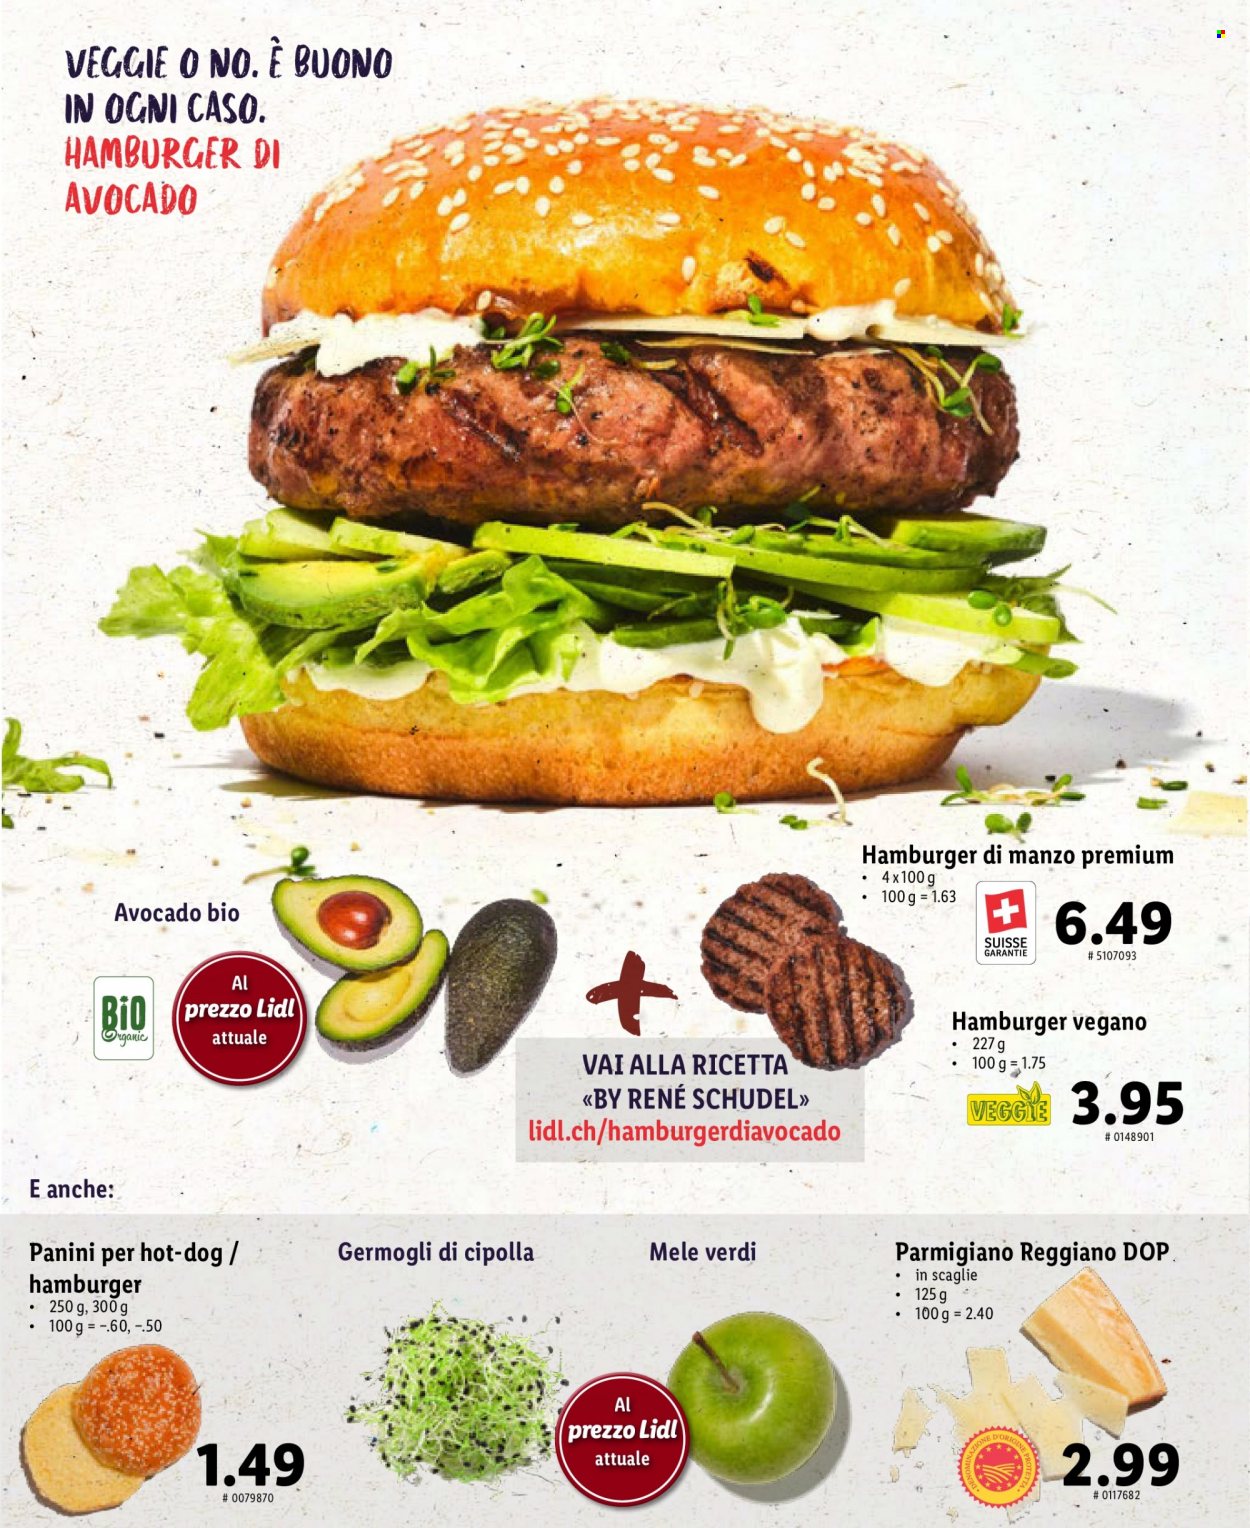 Catalogue Lidl. Page 18.